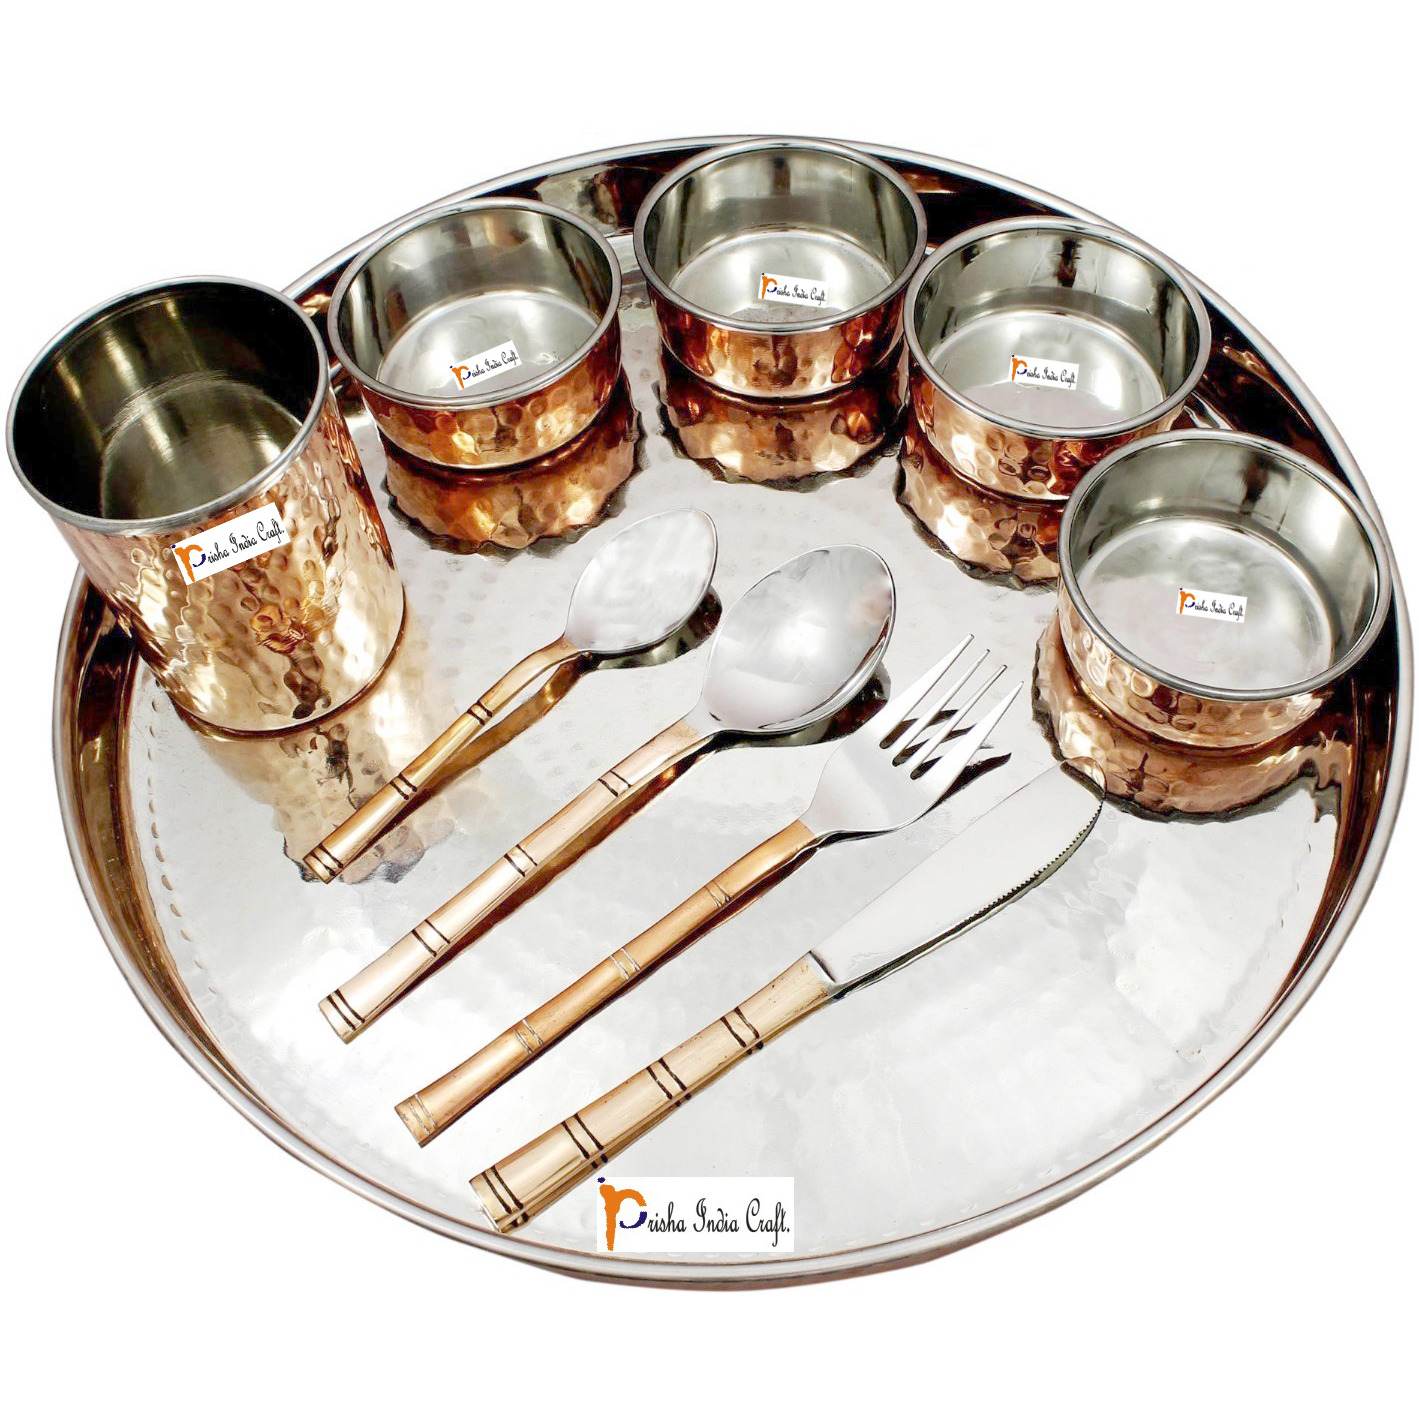 Prisha India Craft B. Set of 4 Dinnerware Traditional Stainless Steel Copper Dinner Set of Thali Plate, Bowls, Glass and Spoons, Dia 13  With 1 Luxury Style Pitcher Jug - Christmas Gift